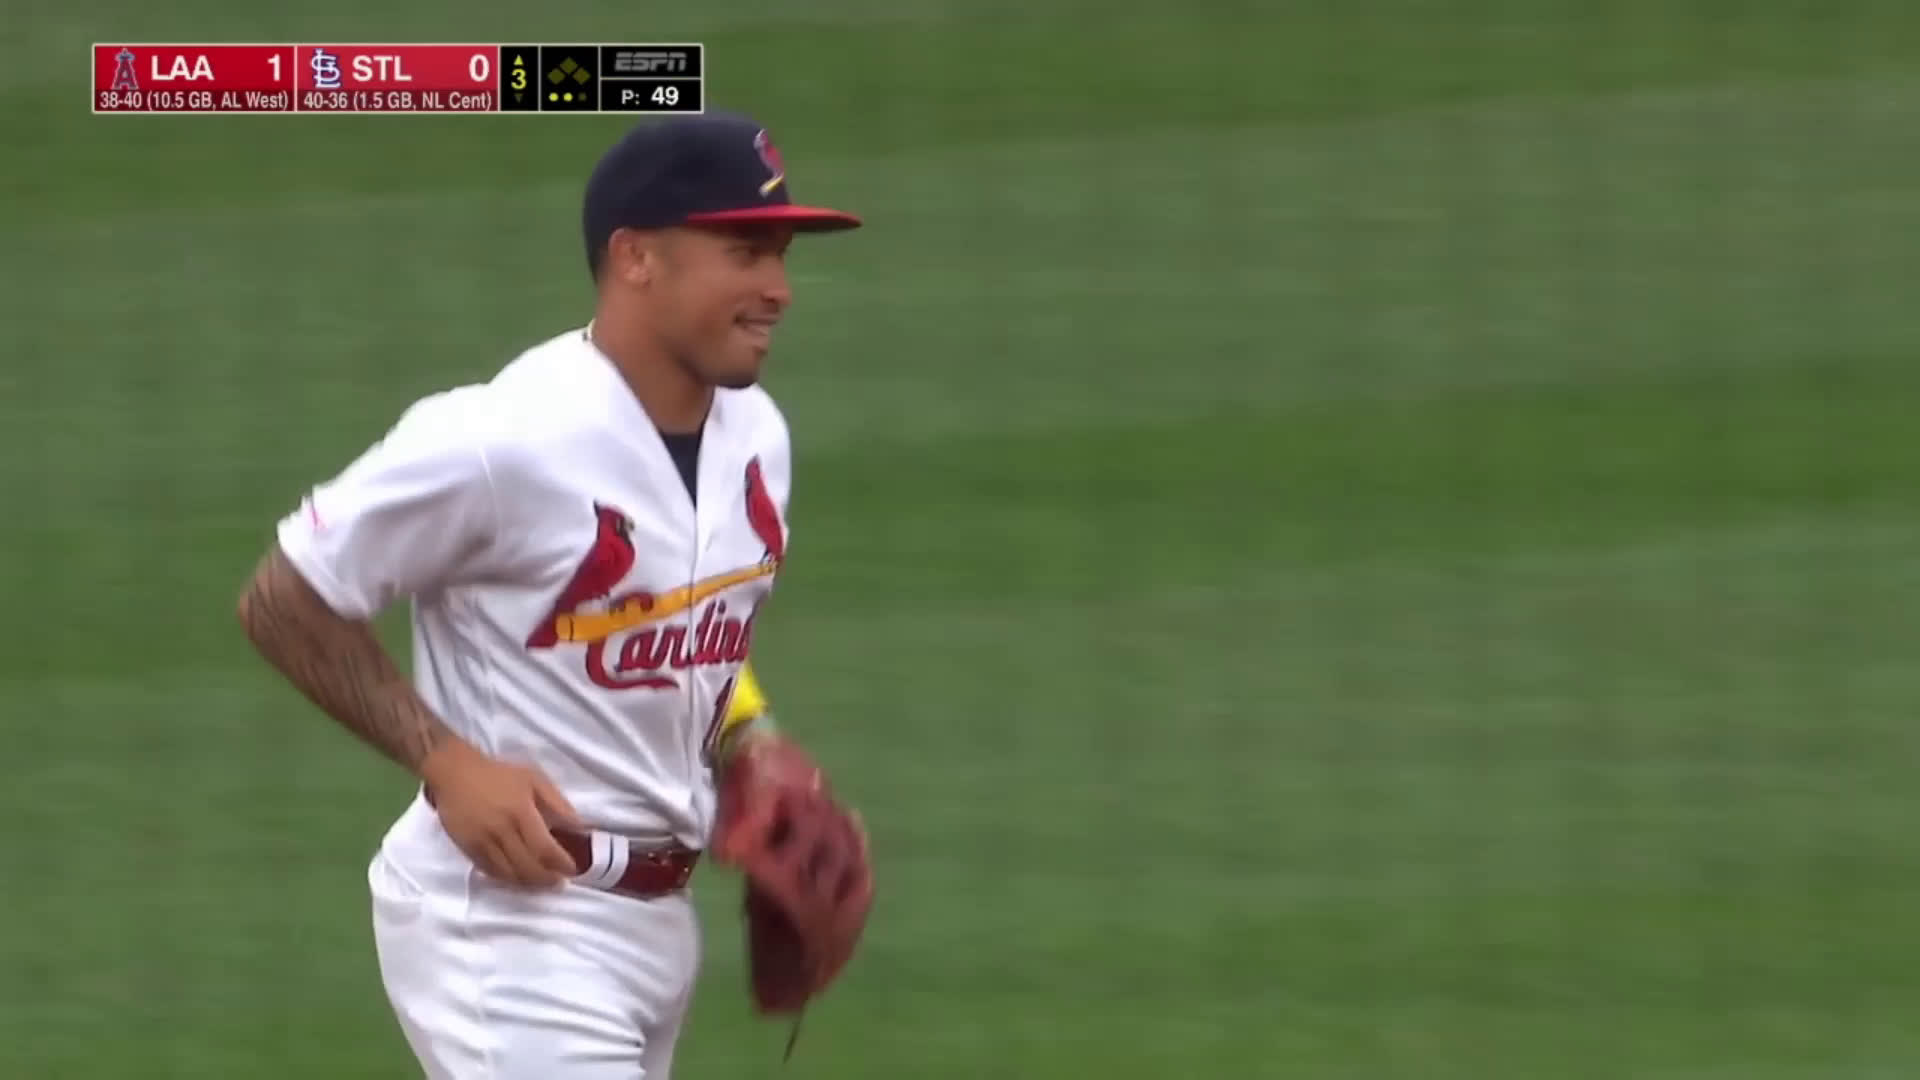 Kolten Wong with a circus style double play : r/baseball